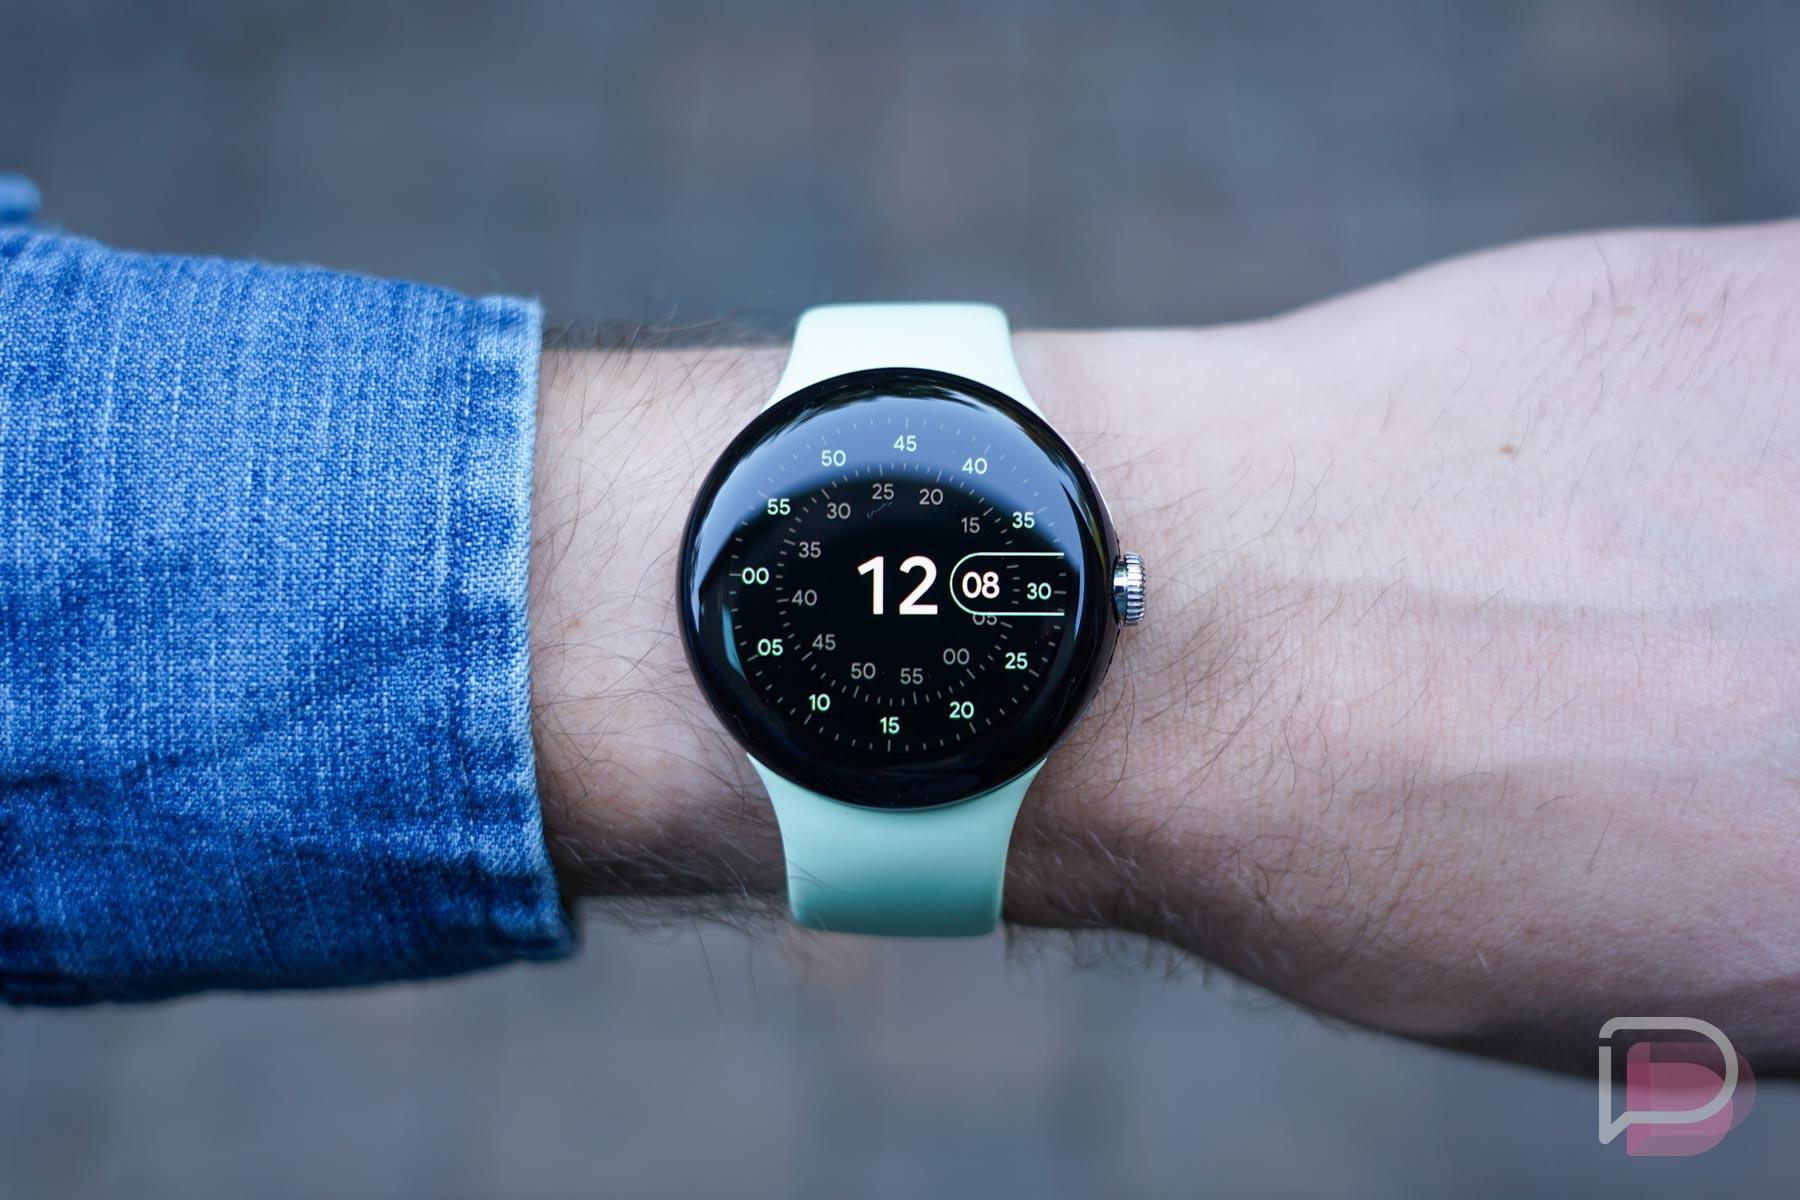 Pixel Watch Review: The Time Is Not Quite Right For Google's